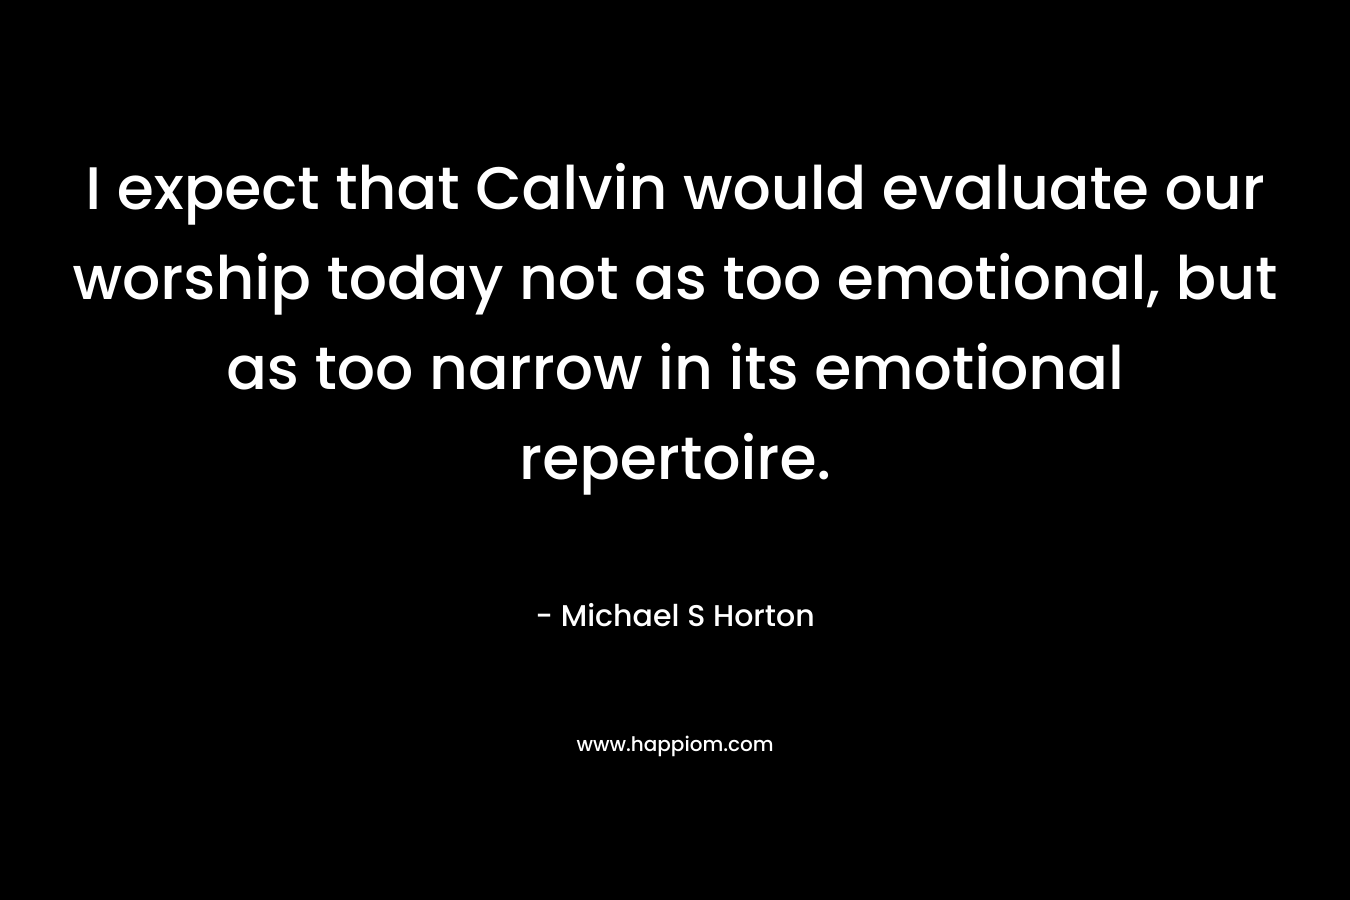 I expect that Calvin would evaluate our worship today not as too emotional, but as too narrow in its emotional repertoire. – Michael S Horton